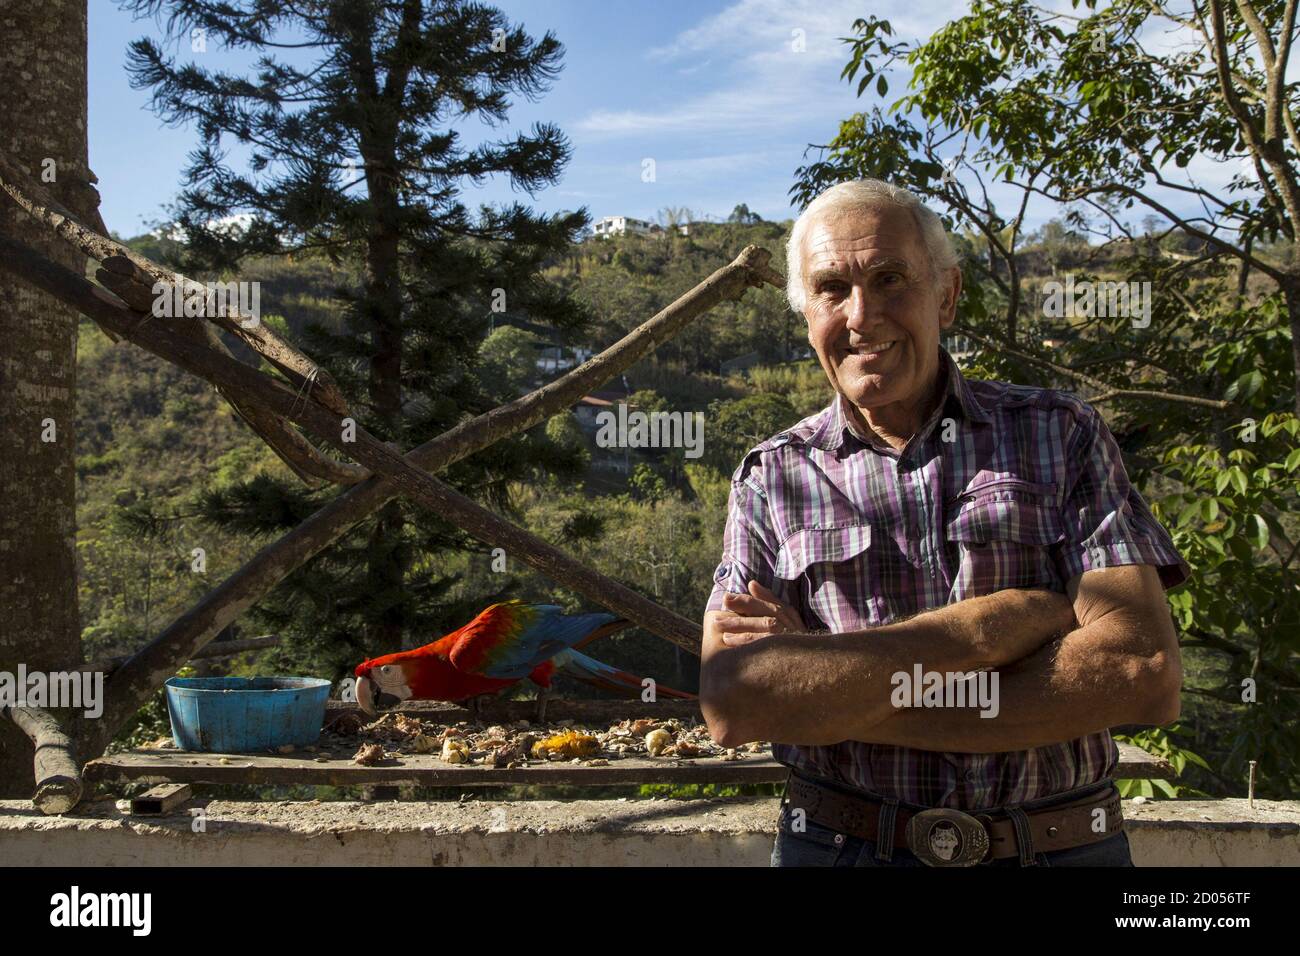 Vittorio Poggi poses for a picture at his balcony in Caracas April 10, 2015. In the 1970s, at the foot of the Caribbean mountain range flanking Caracas, a motorcycle-riding Italian immigrant turned heads for being inexplicably chased by a macaw nicknamed 'Pancho.' The young man, Vittorio Poggi, was an animal lover who was then inspired to breed the birds en masse and release them across the fertile valley that cradles Venezuela's gritty capital. Forty years later, hundreds - perhaps thousands - of descendants of those long-tailed birds color Caracas' sky, giving its five million residents a mo Stock Photo